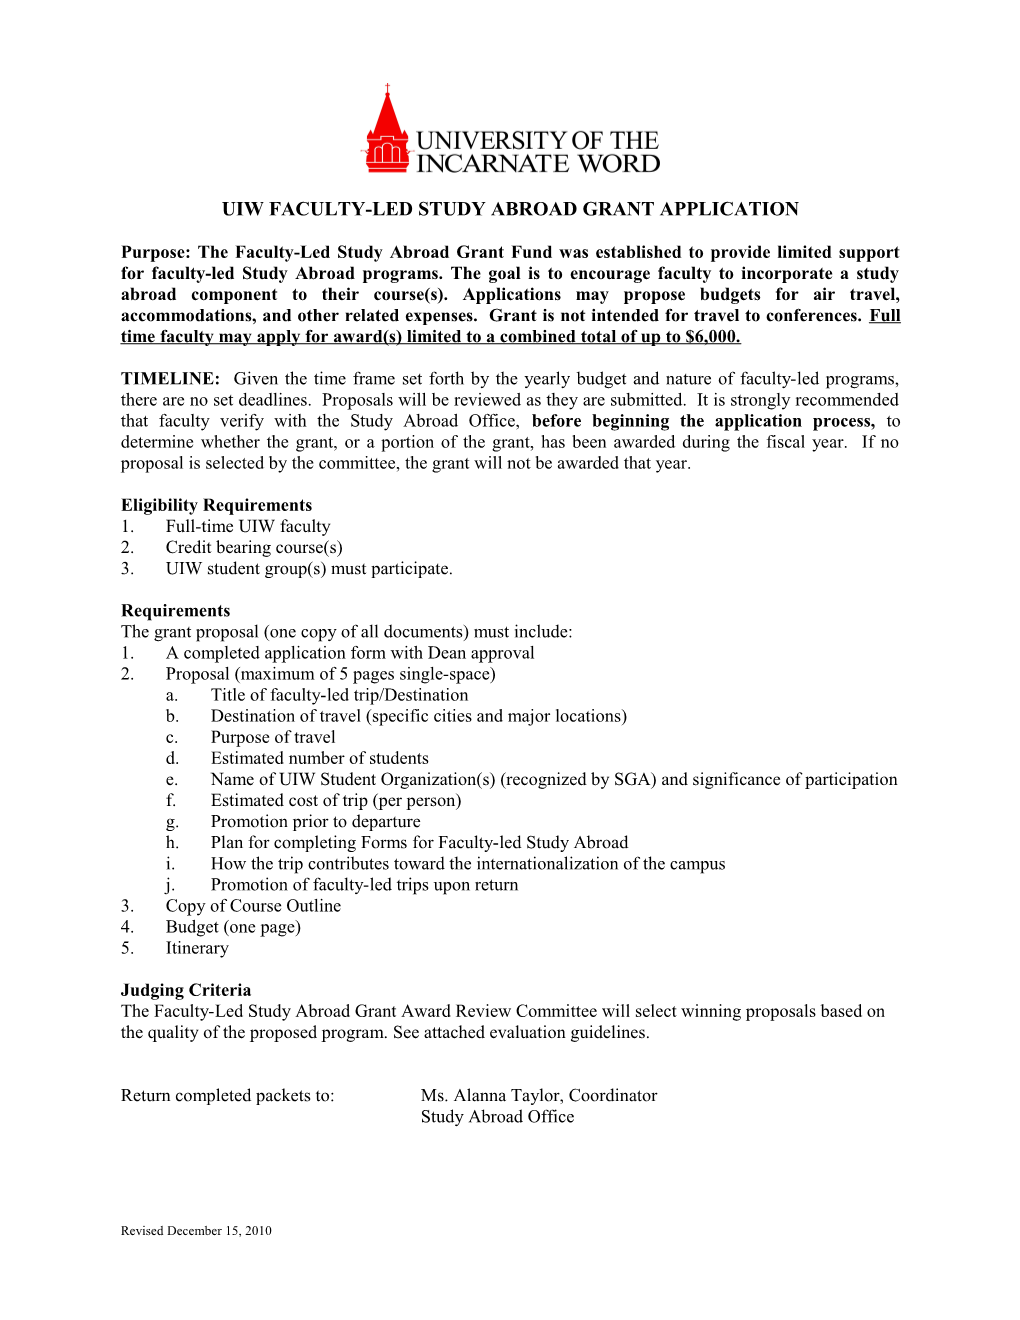 Uiw Faculty-Led Study Abroad Grant Application